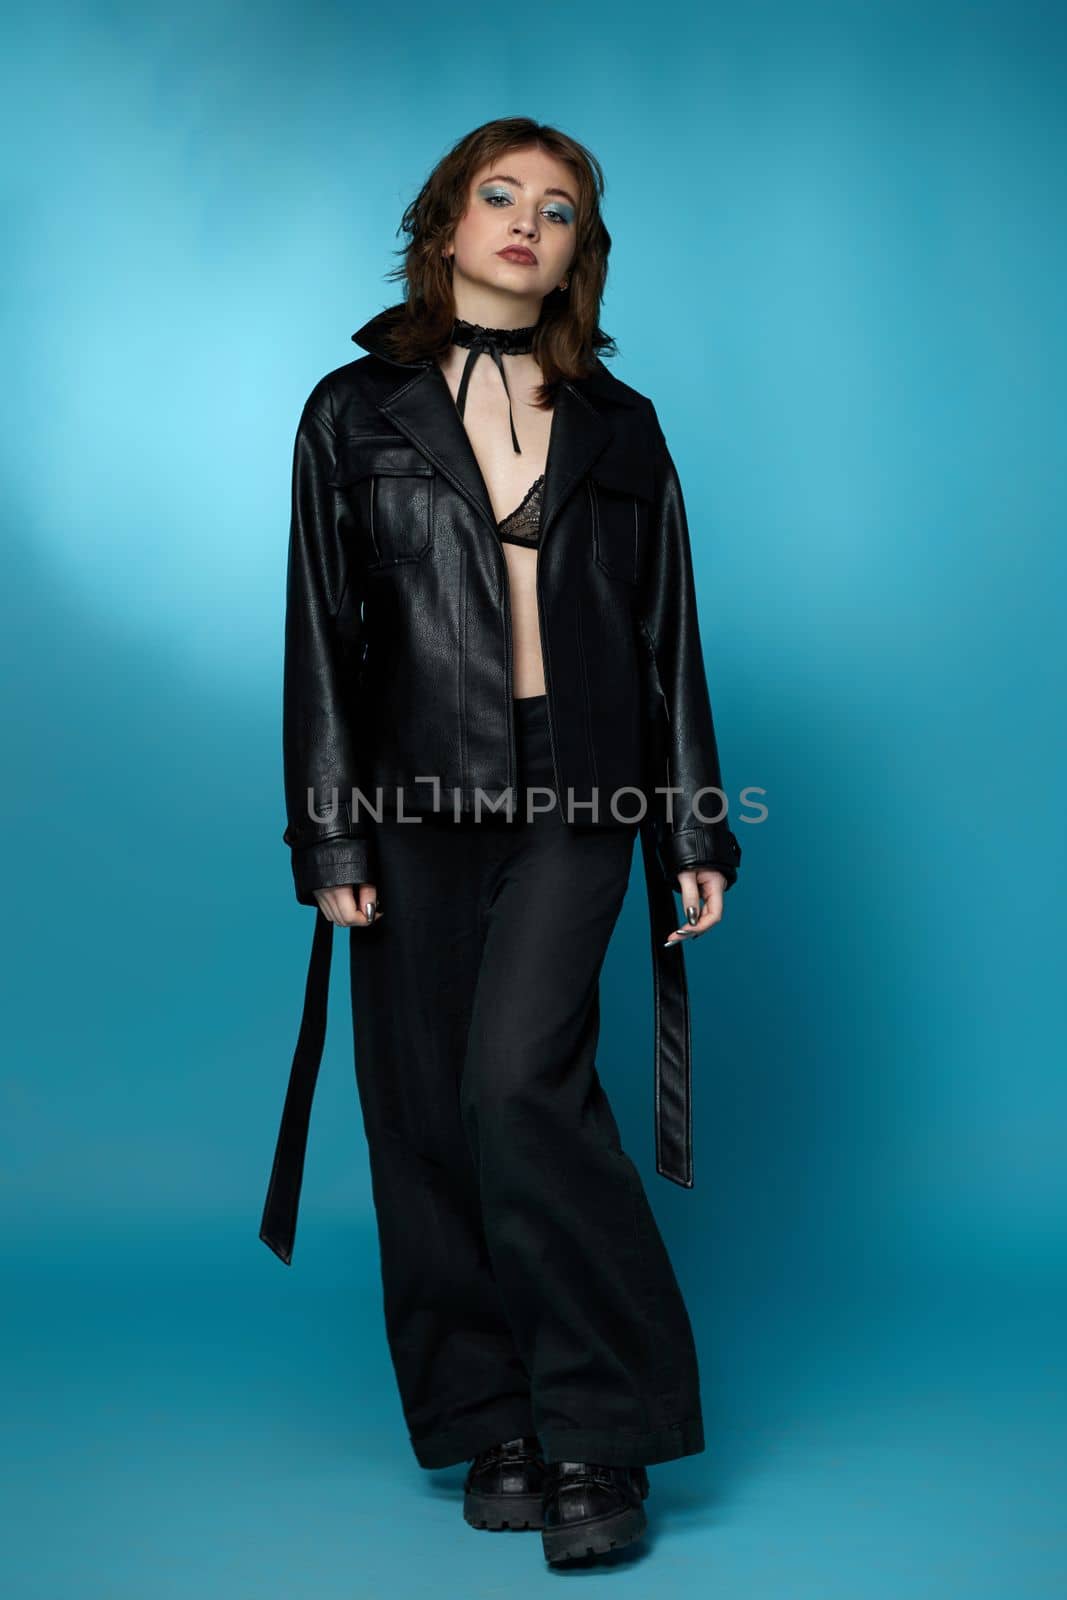 young woman posing in black leather jacket and pants by erstudio